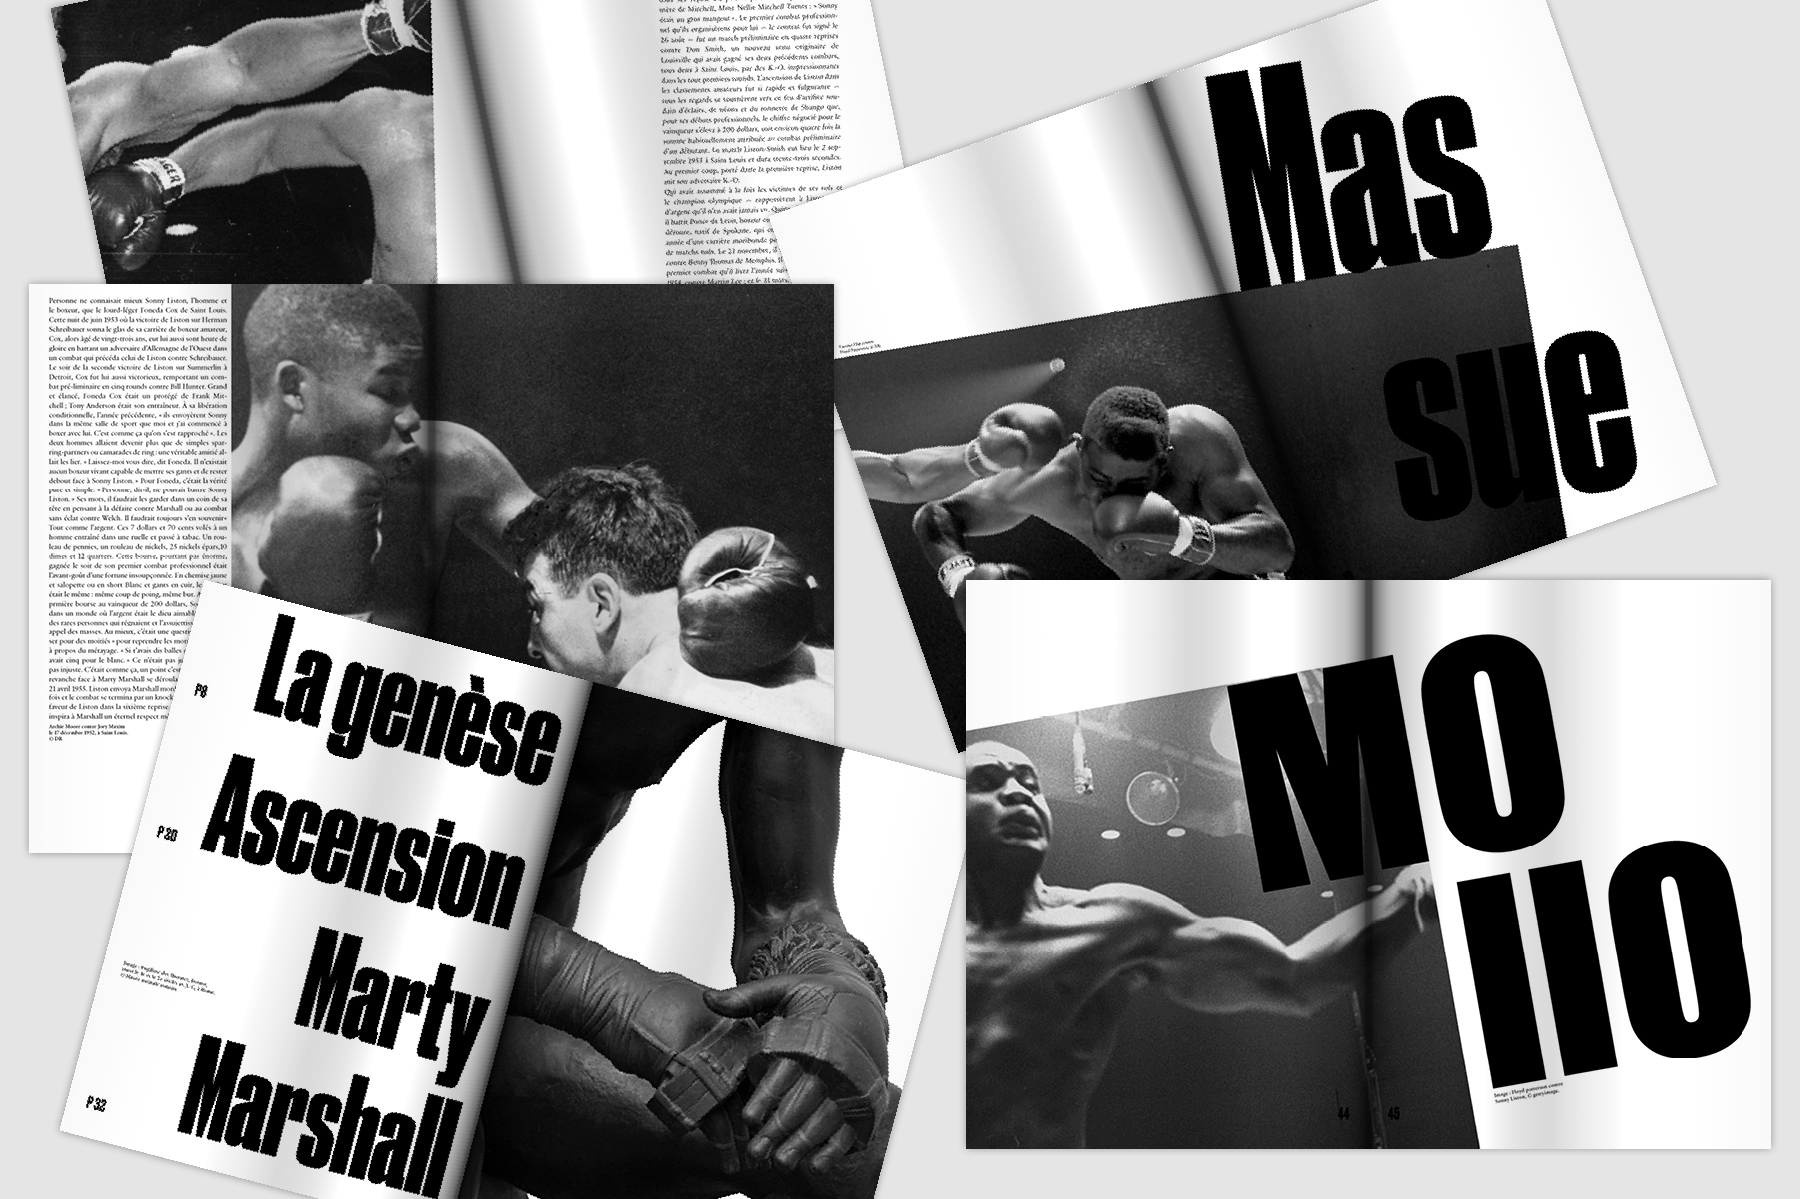 Impact, Charles Sonny Liston, Nick Toshes, by ©Adrien jacquemet graphic designer